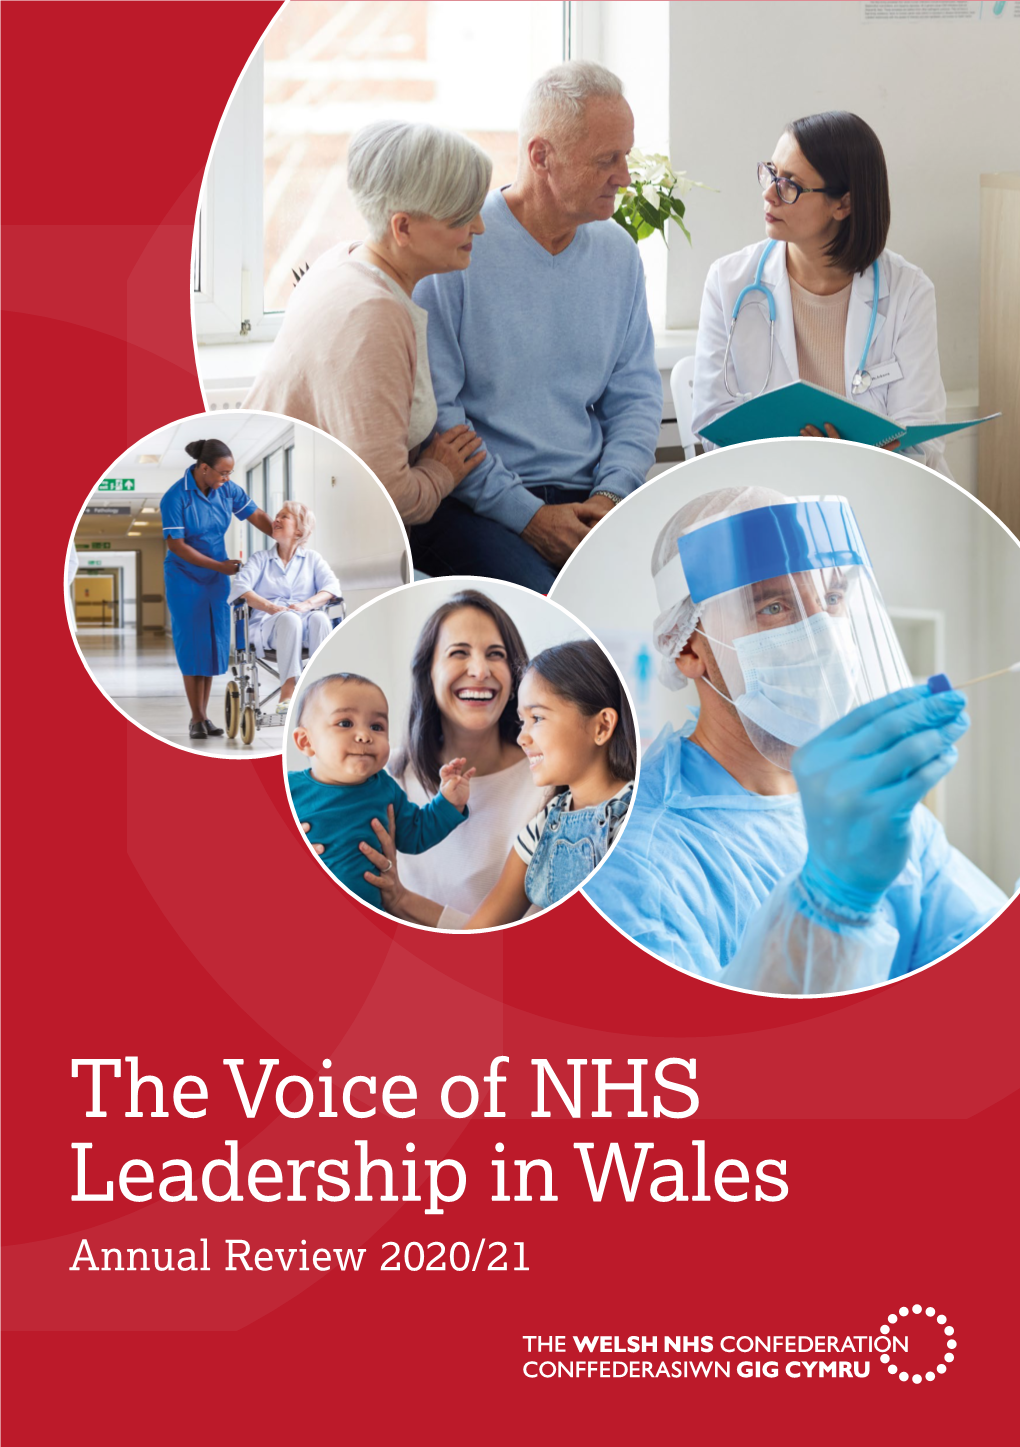 The Voice of NHS Leadership in Wales Annual Review 2020/21 Who Are We?